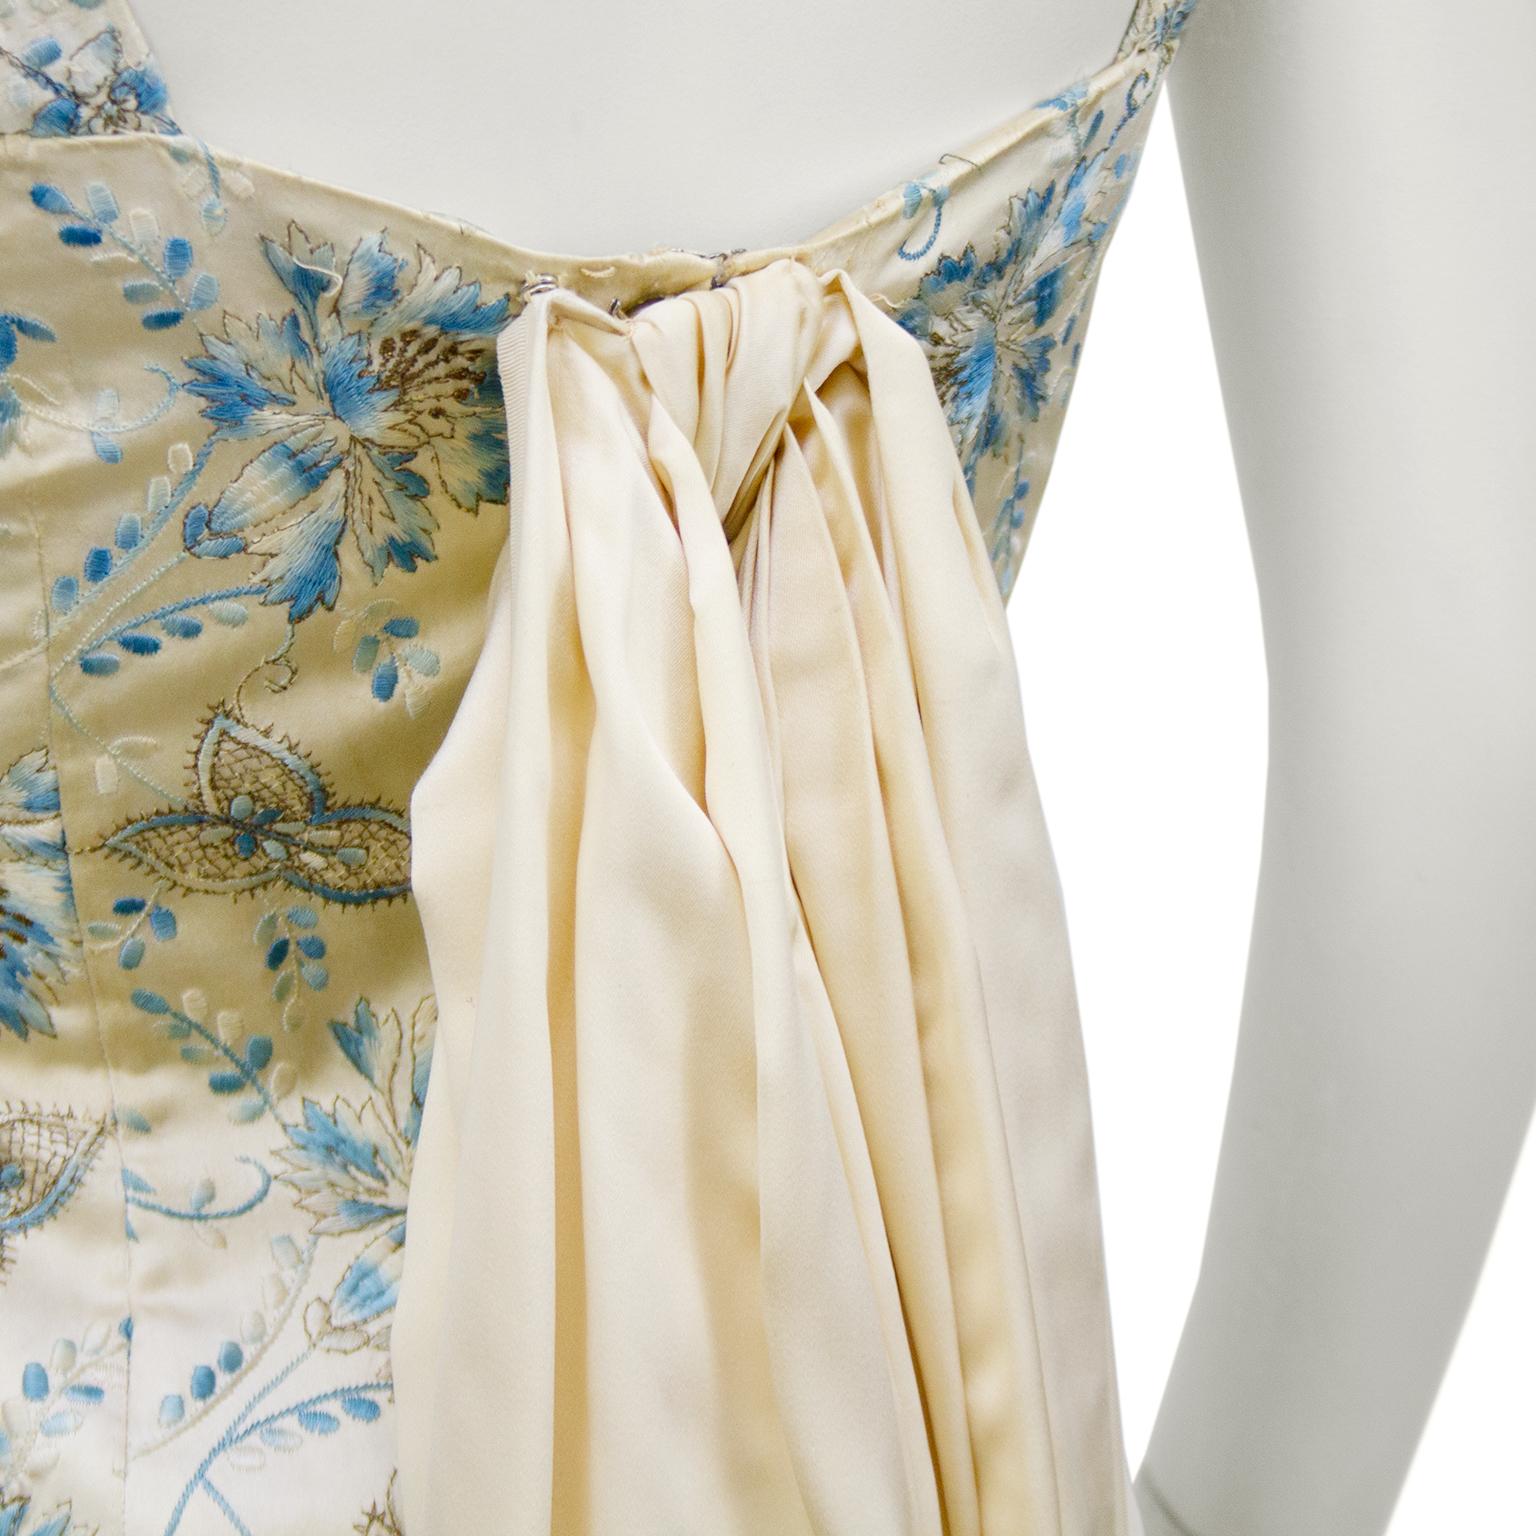 Women's 1960s Cream and Blue Floral Embroidered Satin Cocktail Dress